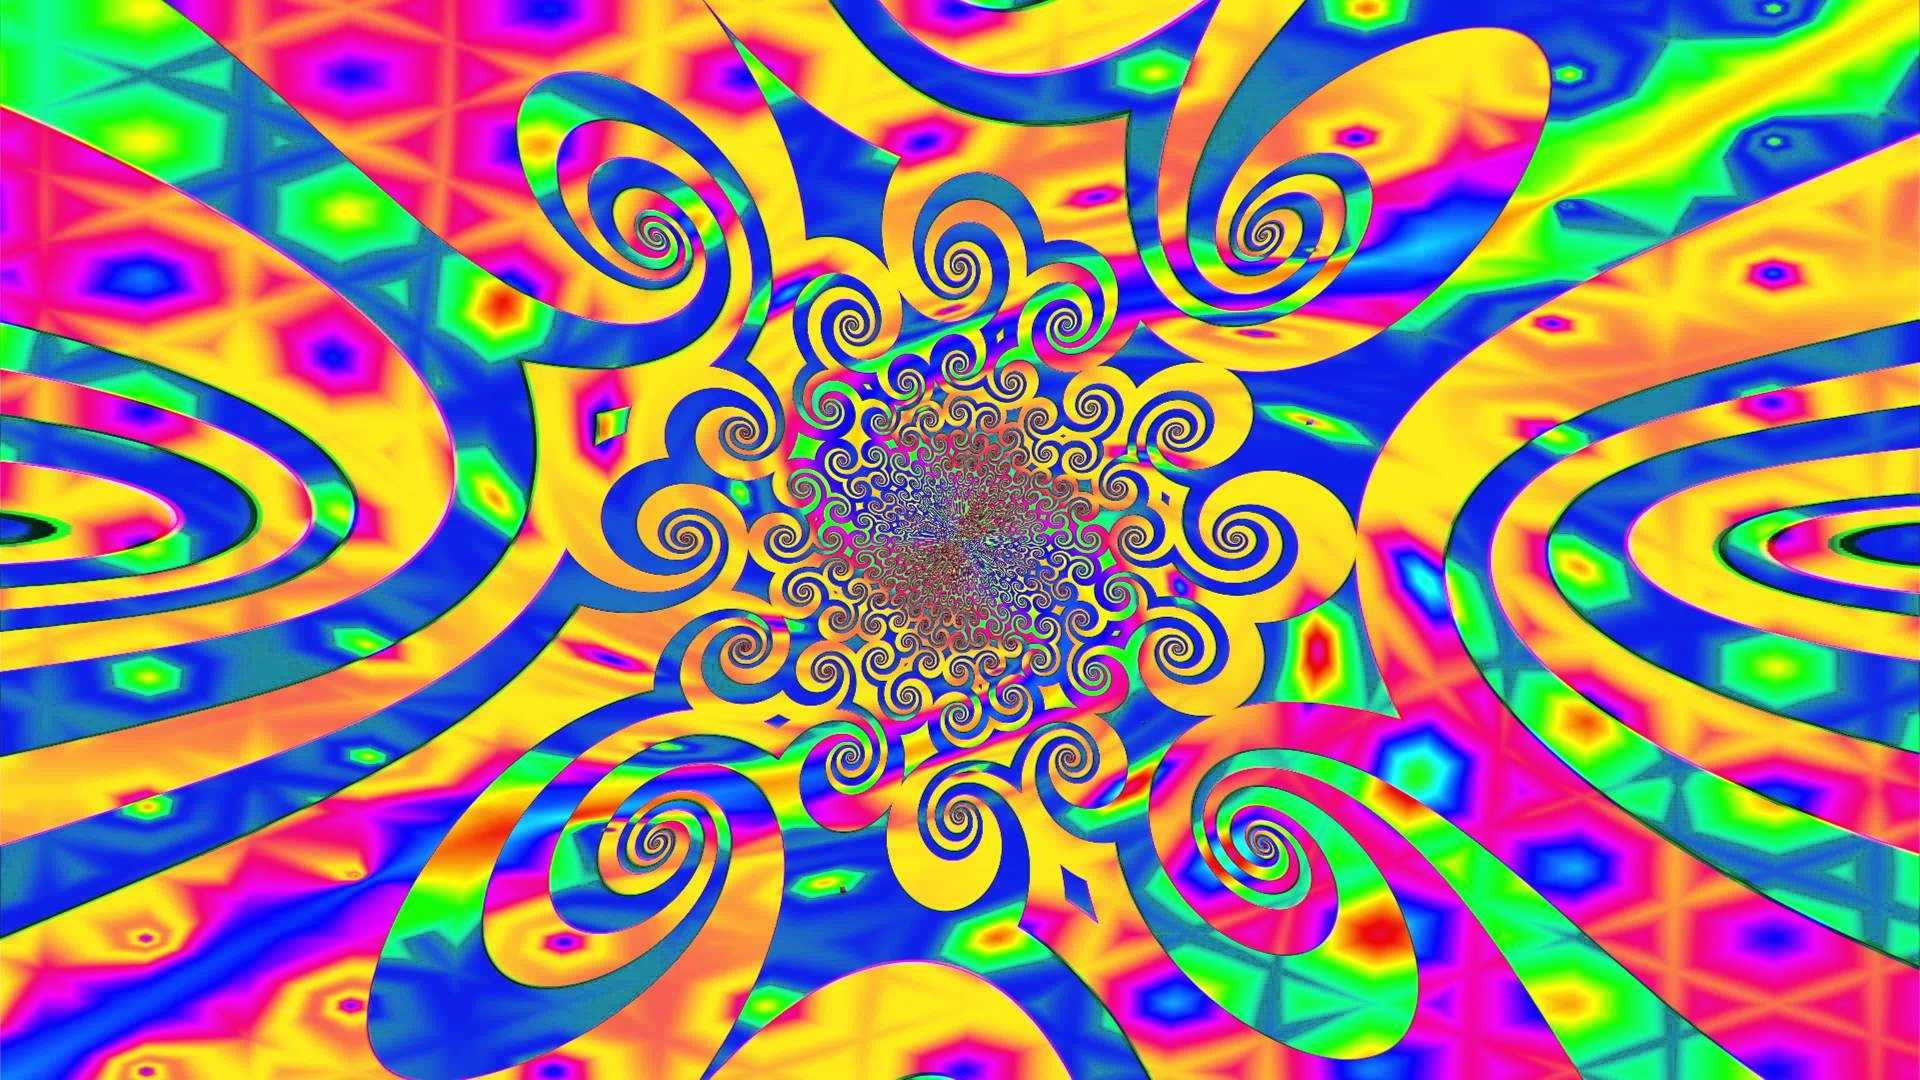 Psychedelic Hd Wallpapers Kolpaper Awesome Free Hd Wallpapers